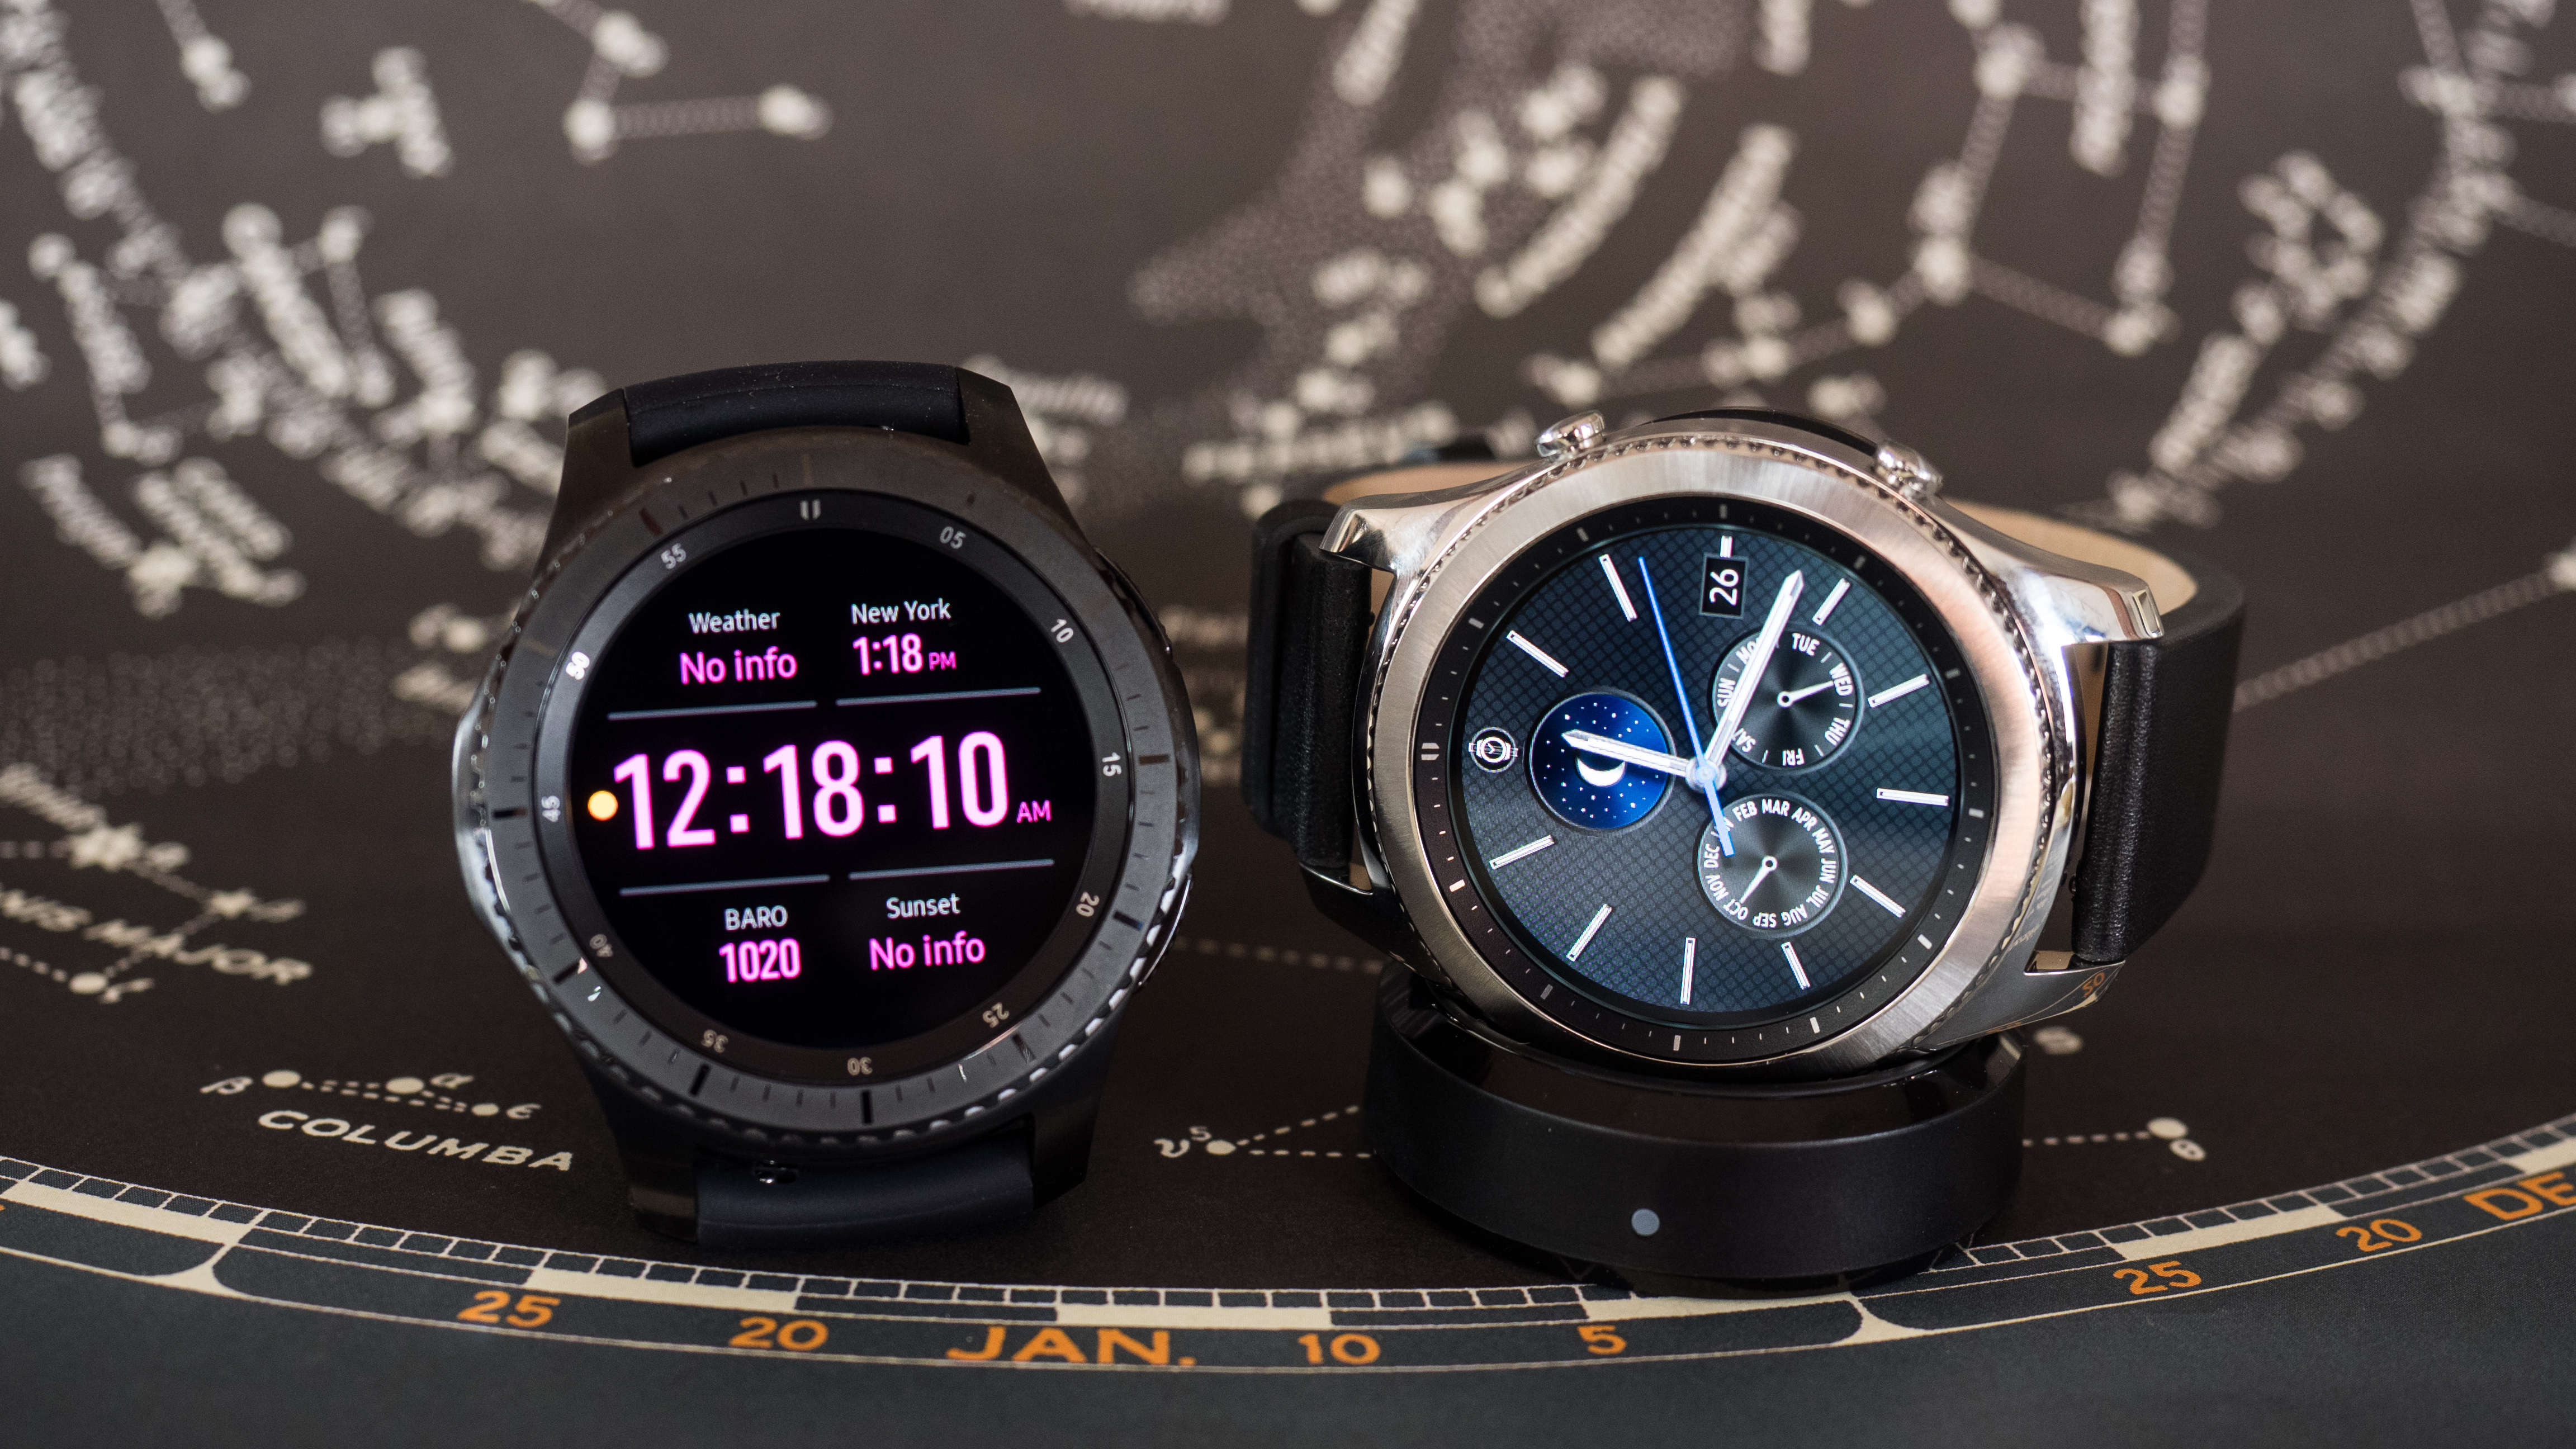 Hands-On: The Samsung Gear S3 Smartwatch Classic And